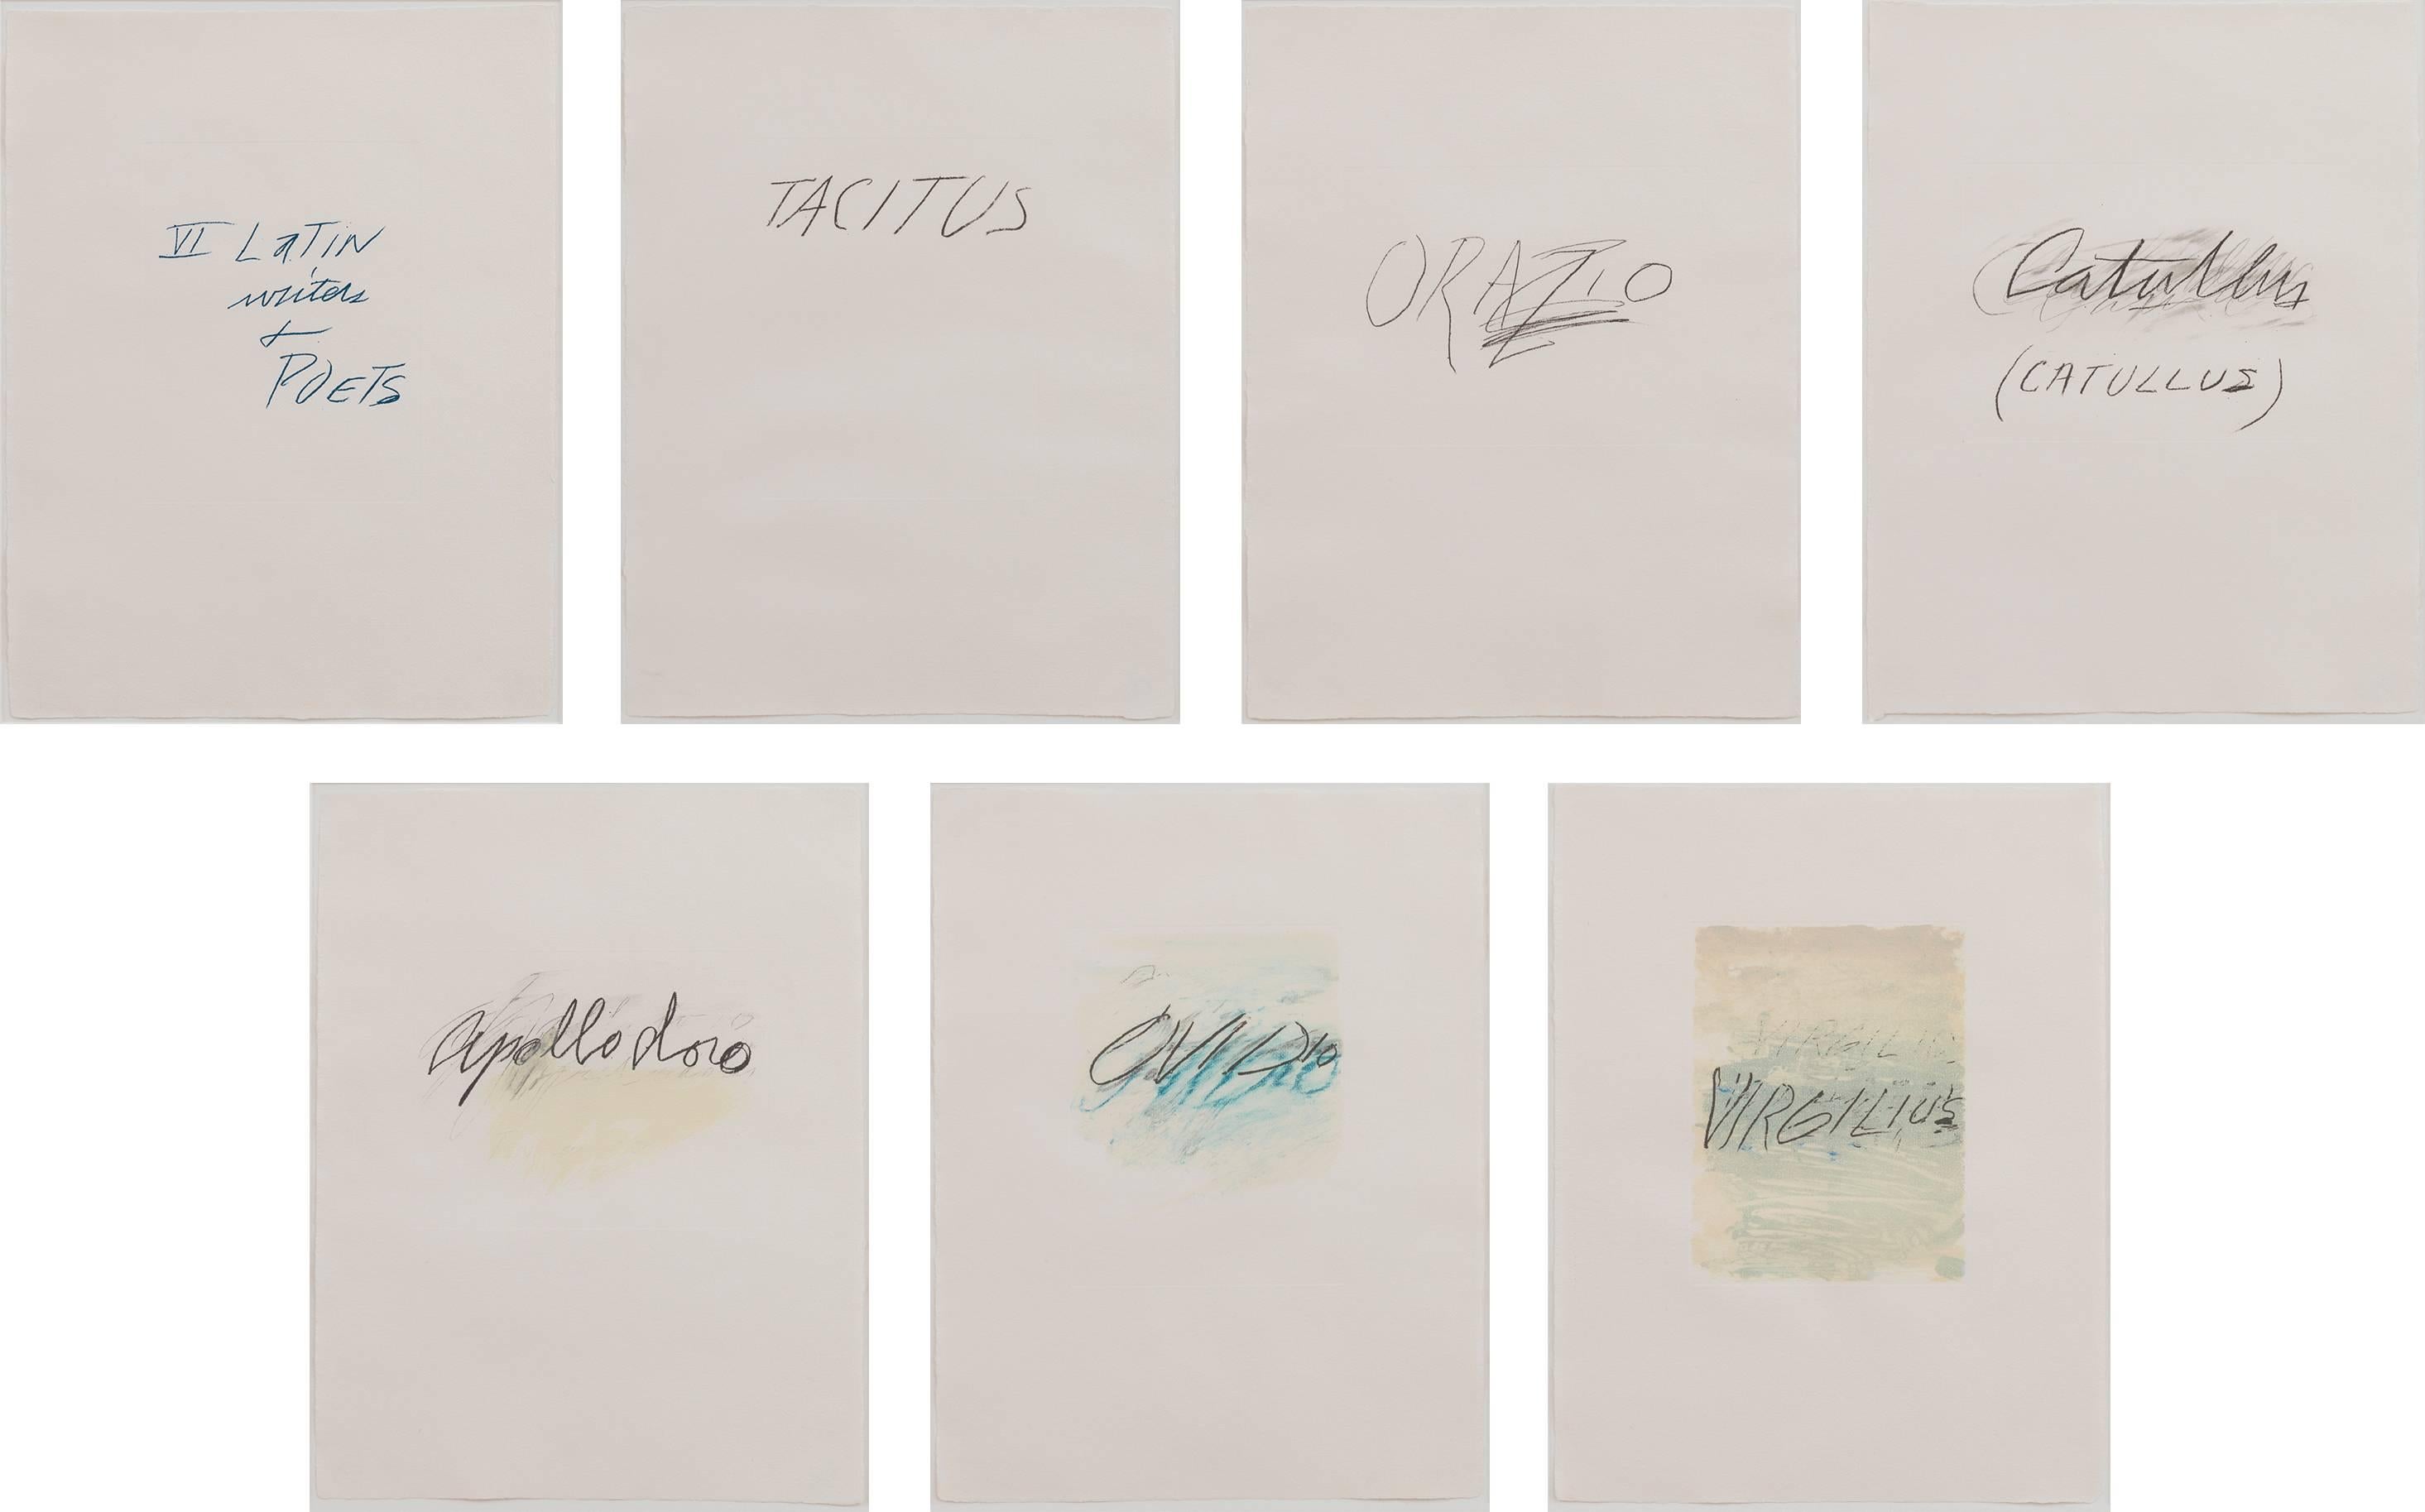 Six Latin Writers and Poets - Print by Cy Twombly